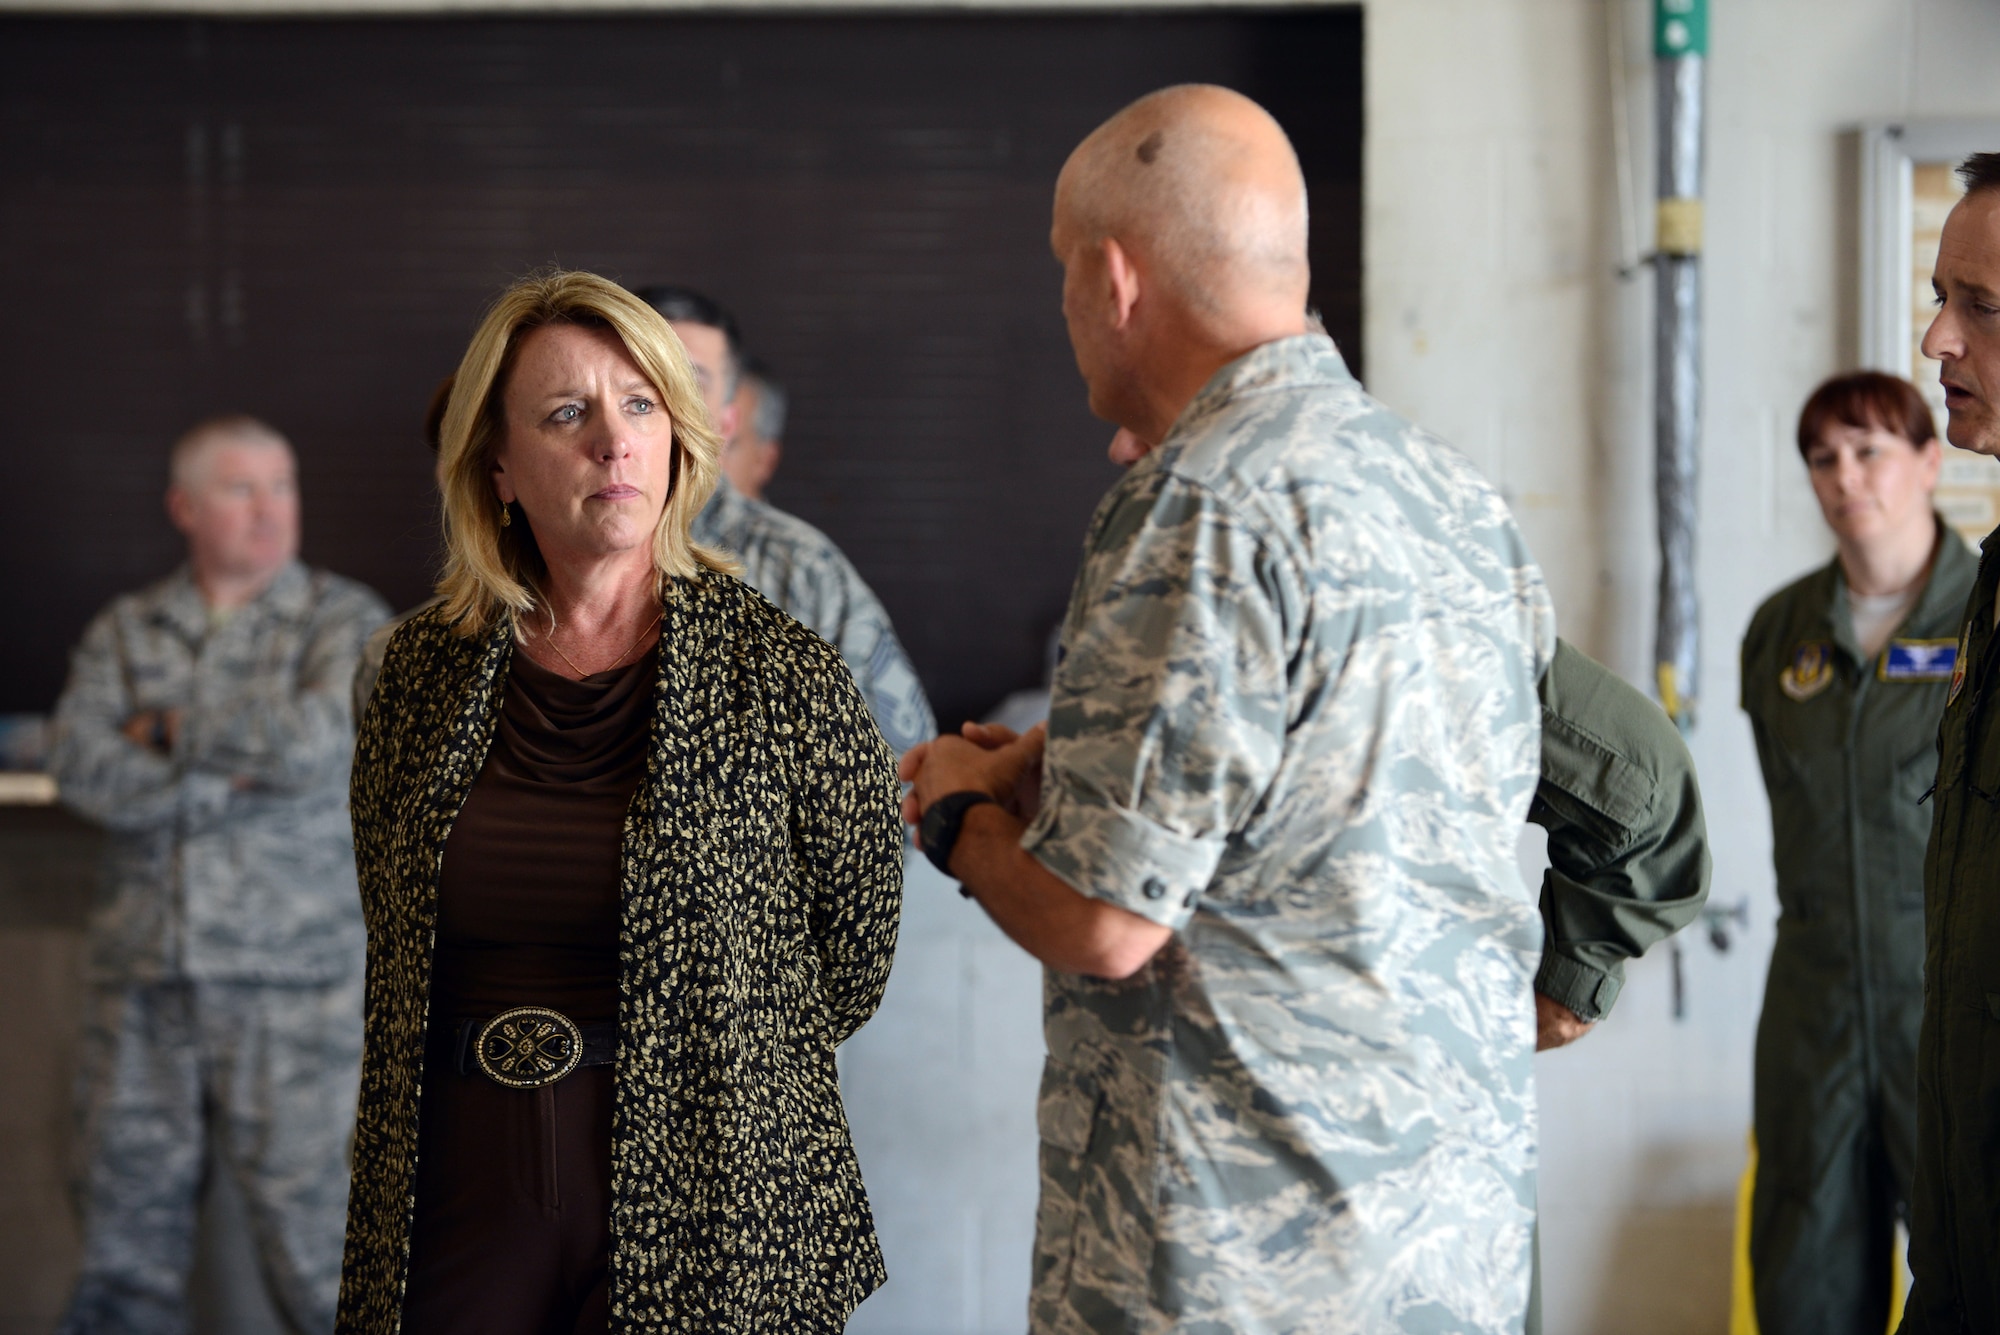 Secretary of the Air Force Deborah Lee James receives a briefing from Col. Kelly Scott Aug. 21, 2014, during a tour of the 461st and 116th Air Control Wings at Robins Air Force Base, Ga. During her tour of Robins Air Force Base, James also visited Air Force Reserve Command, the 78th Air Base Wing and the Warner Robins Air Logistics Complex. Scott is the 461st Maintenance Group commander. (U.S. Air Force photo/Tommie Horton)